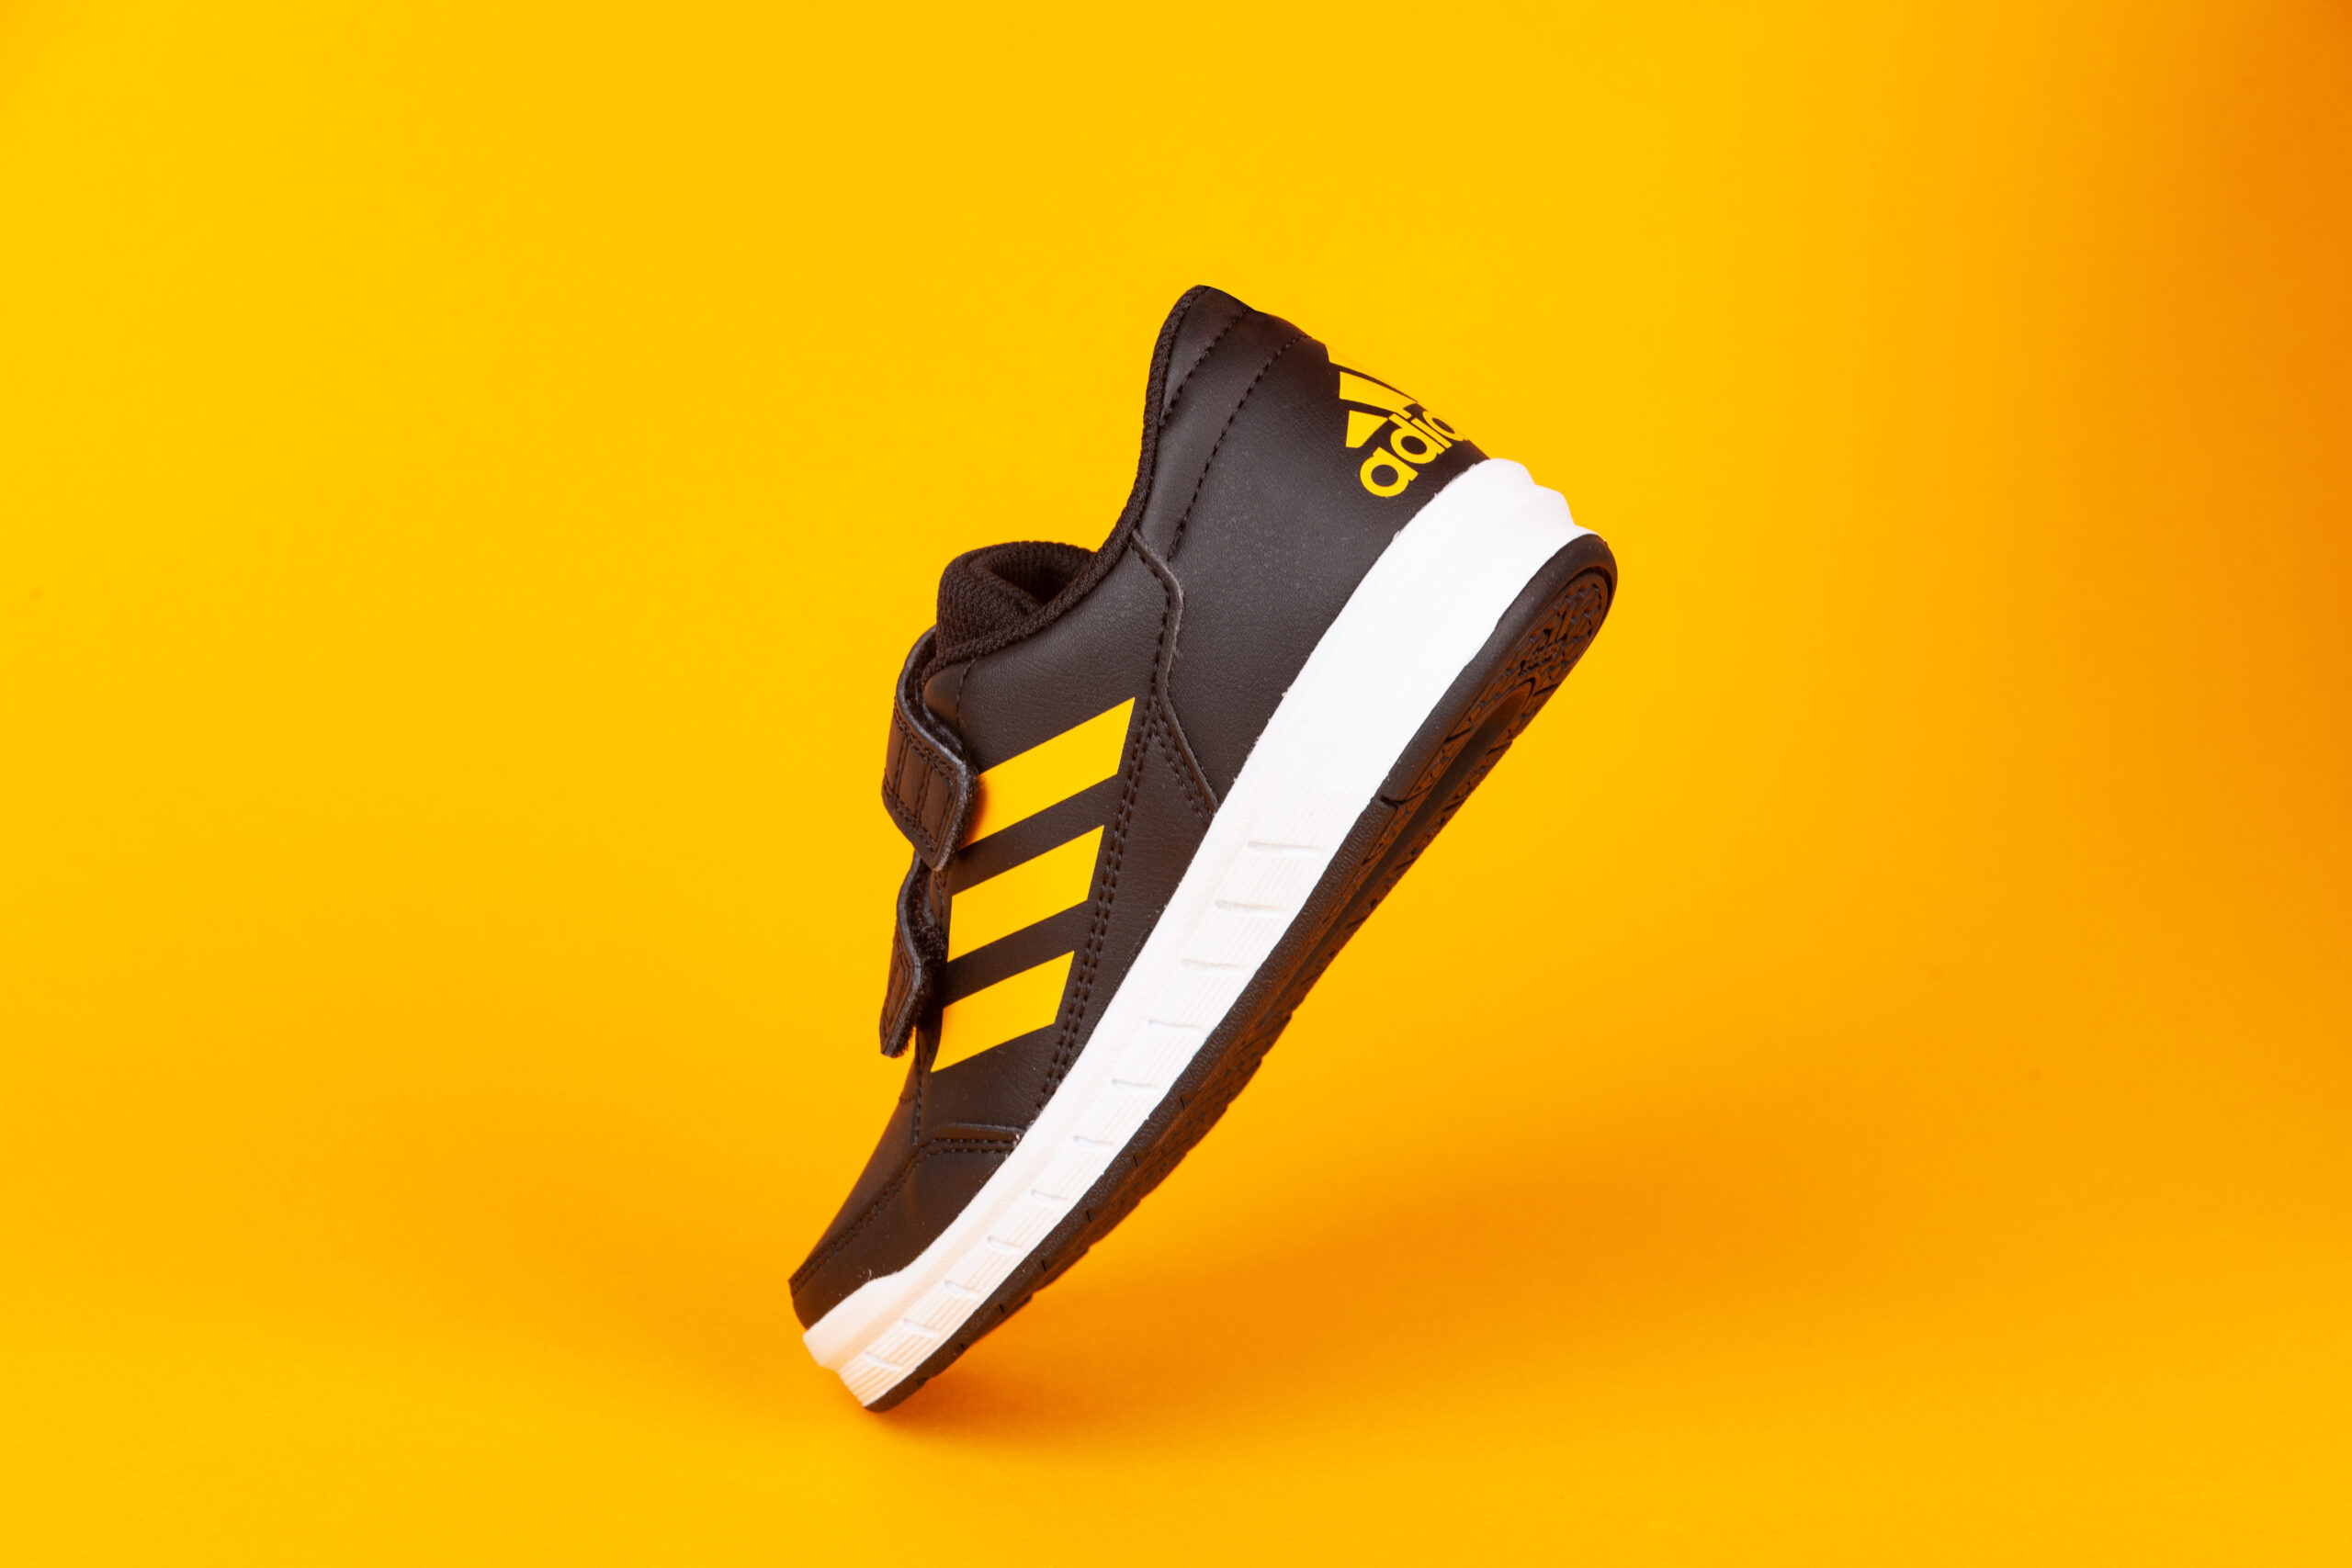 Adidas-black-and-yellow-sports-shoe-on-yellow-background